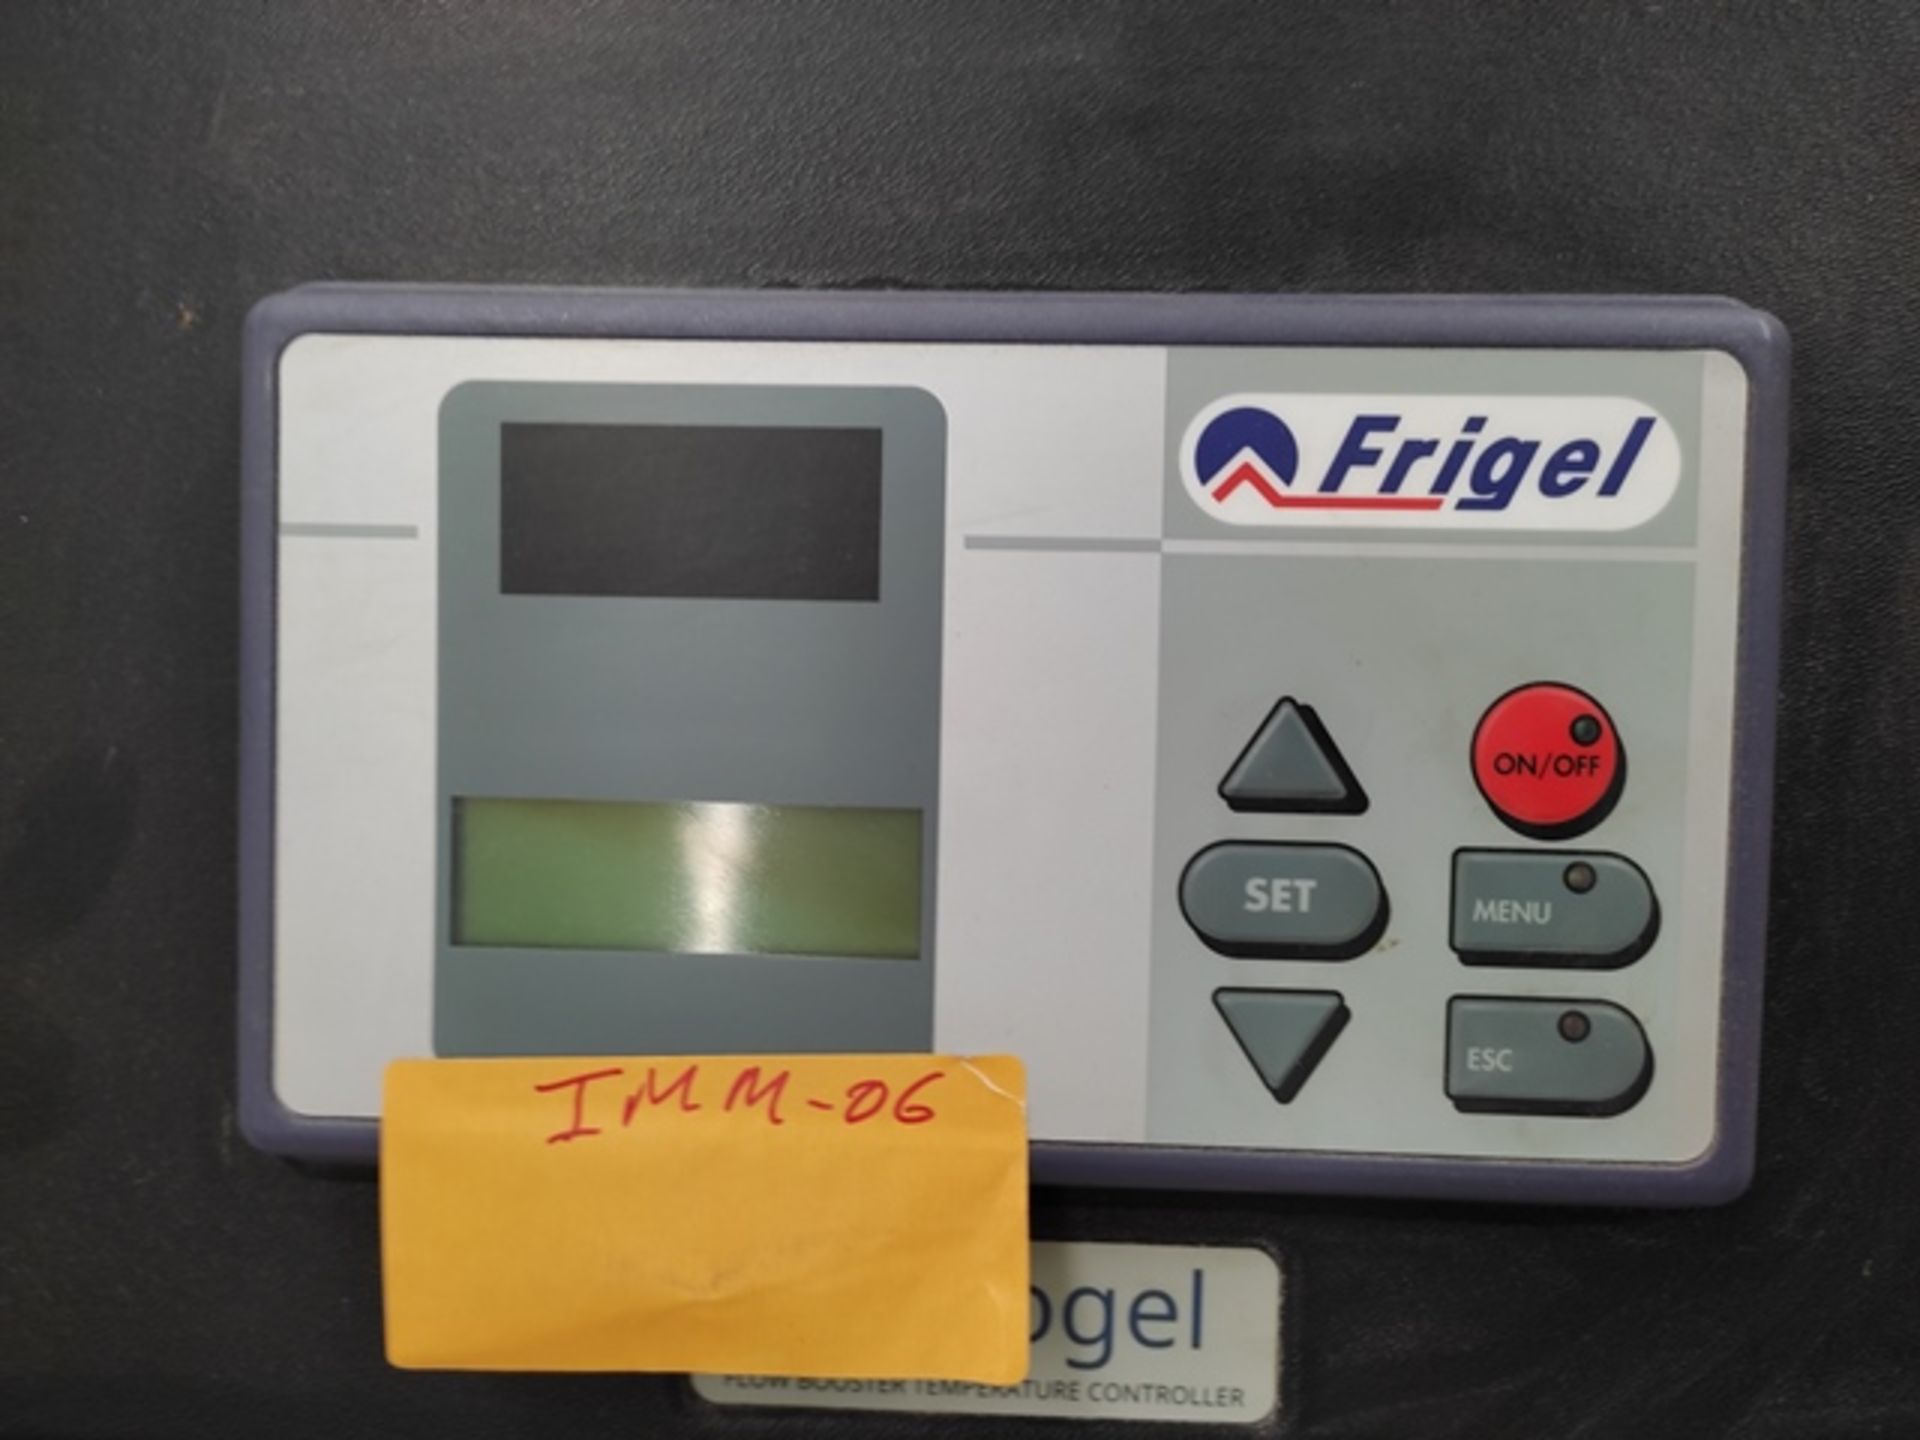 Lot of: (2) Frigel RBD130/24 SP 24 KW Flow Booster Temperature Controllers, Mfg. Year: 2017 - Image 9 of 10